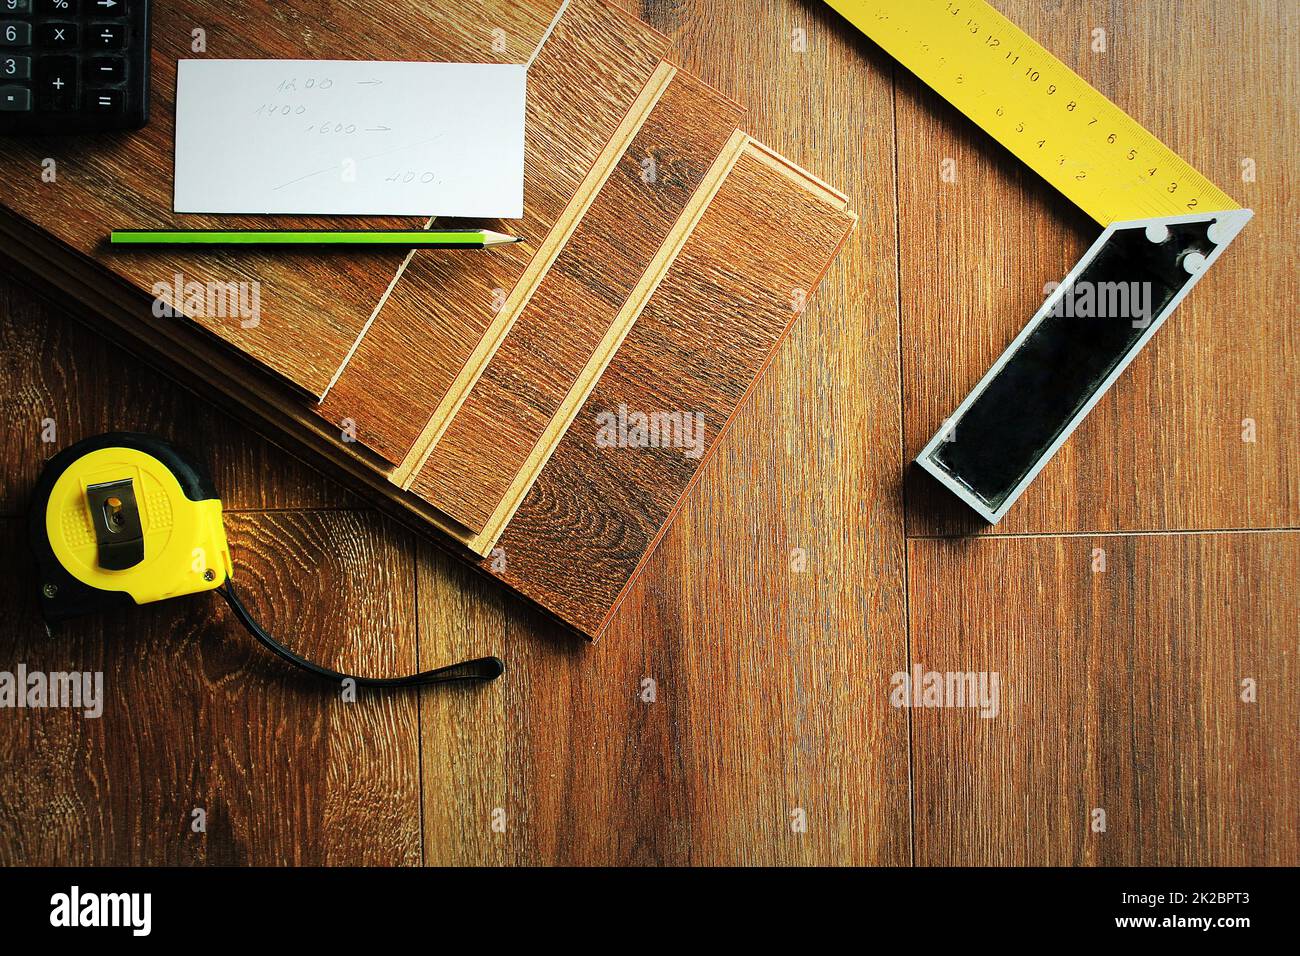 Laminate floor planks and tools on wooden background. Different carpenter tools on the laminated floor .Top view Stock Photo